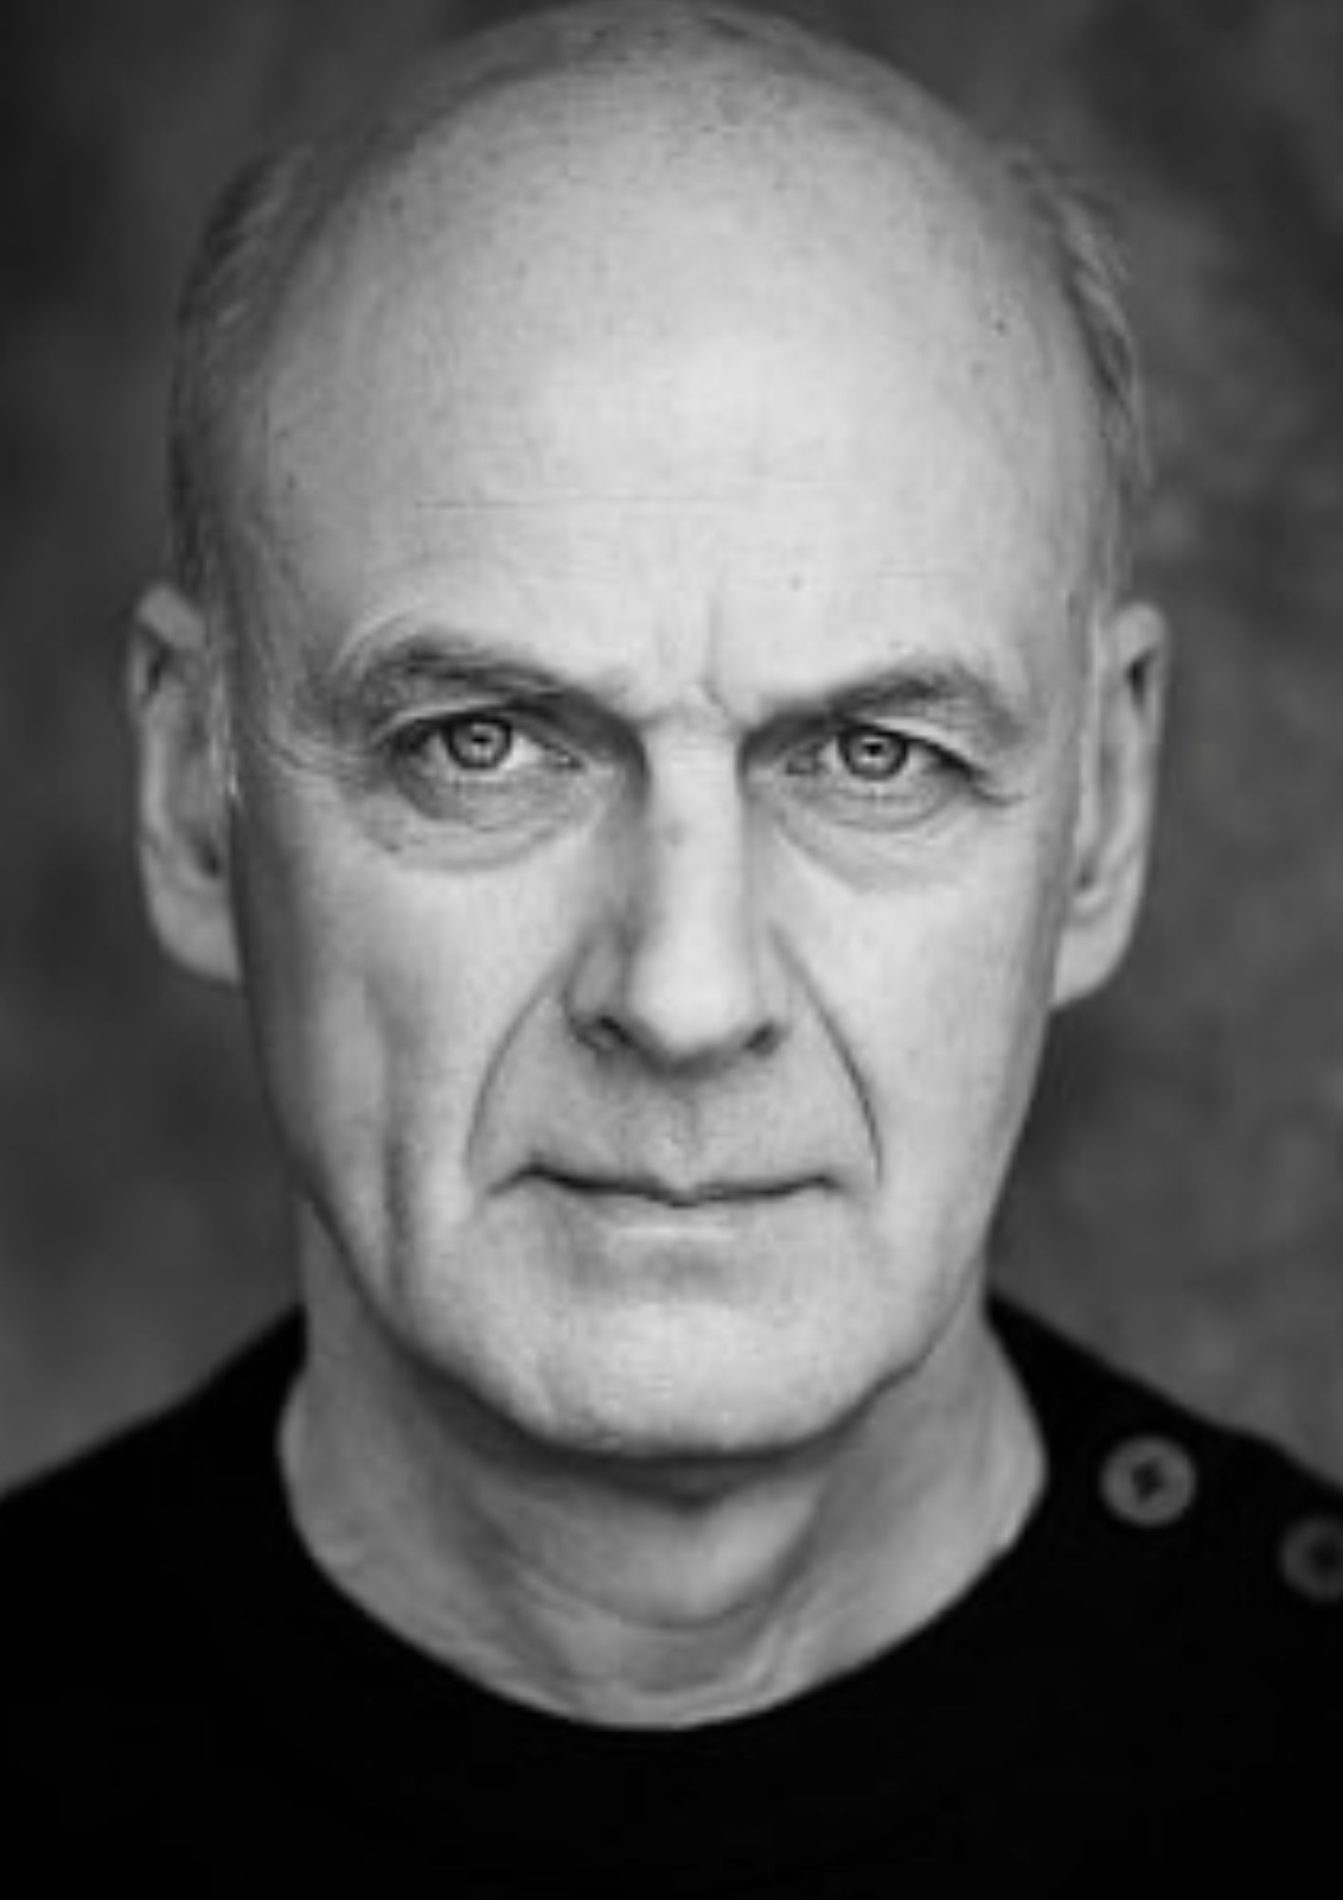 William Chubb's headshot: This image is in black and white. The actor wears a black jumper and has receding white hair.